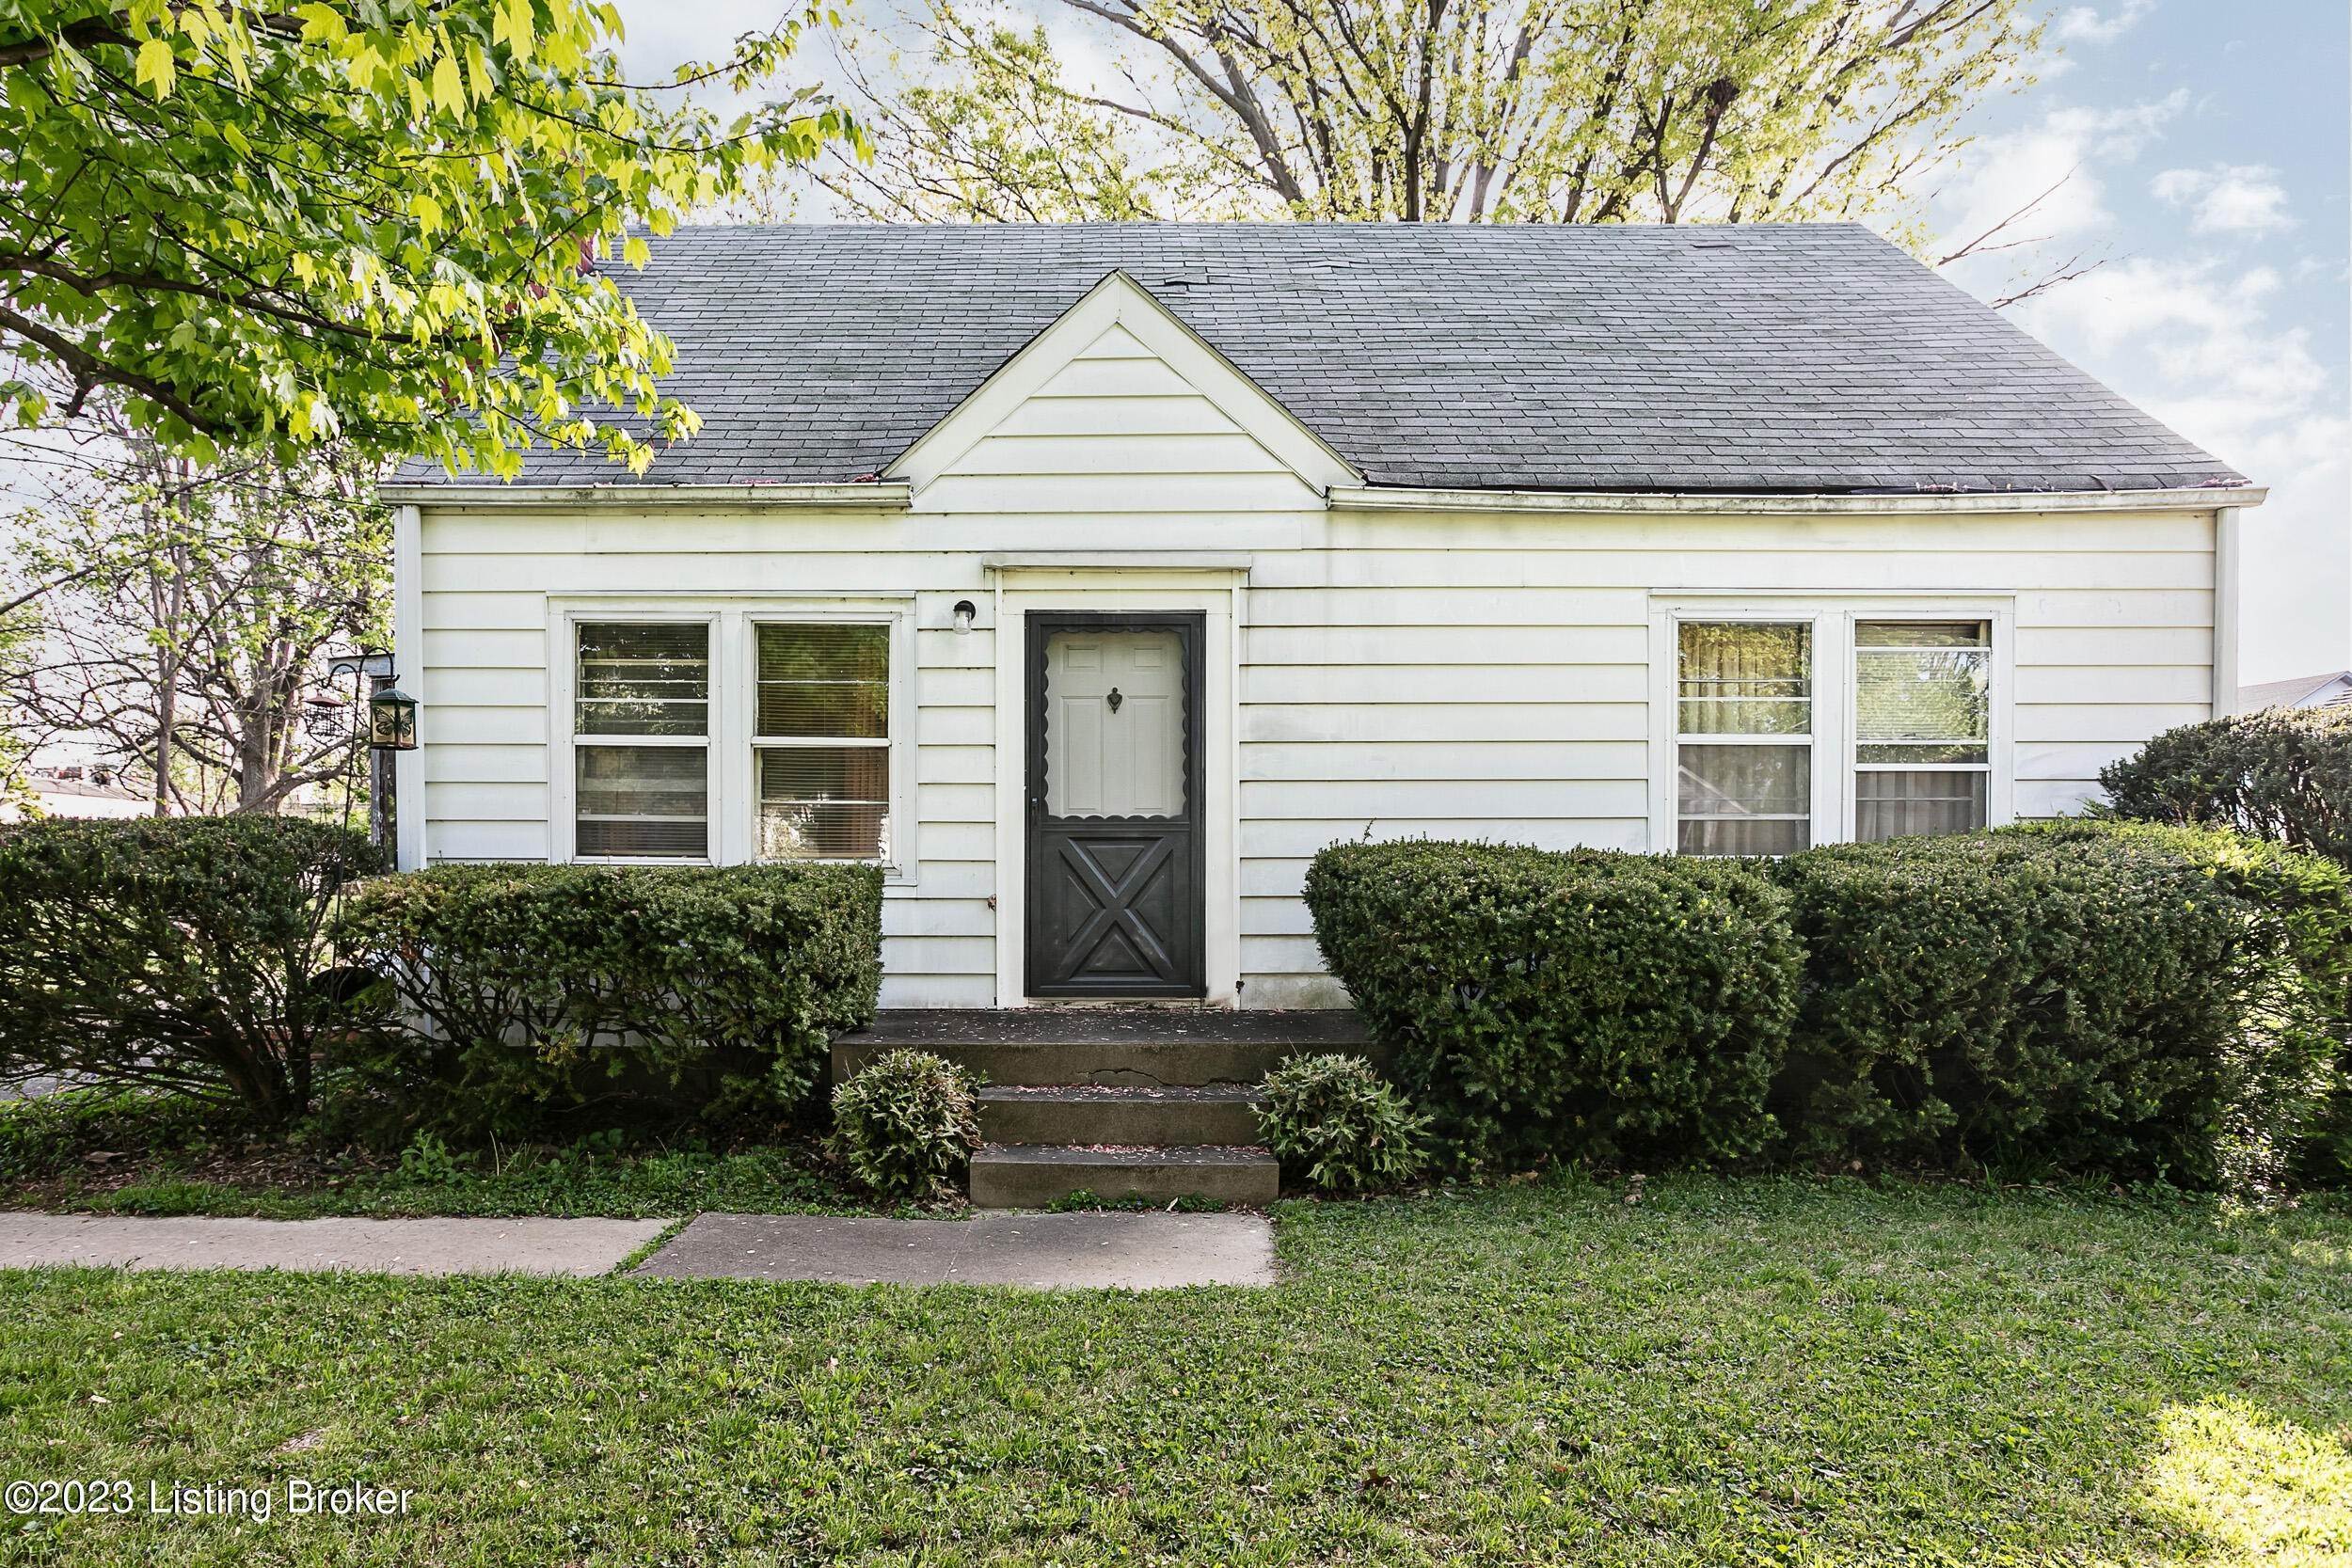 Single Family at Louisville, KY 40219